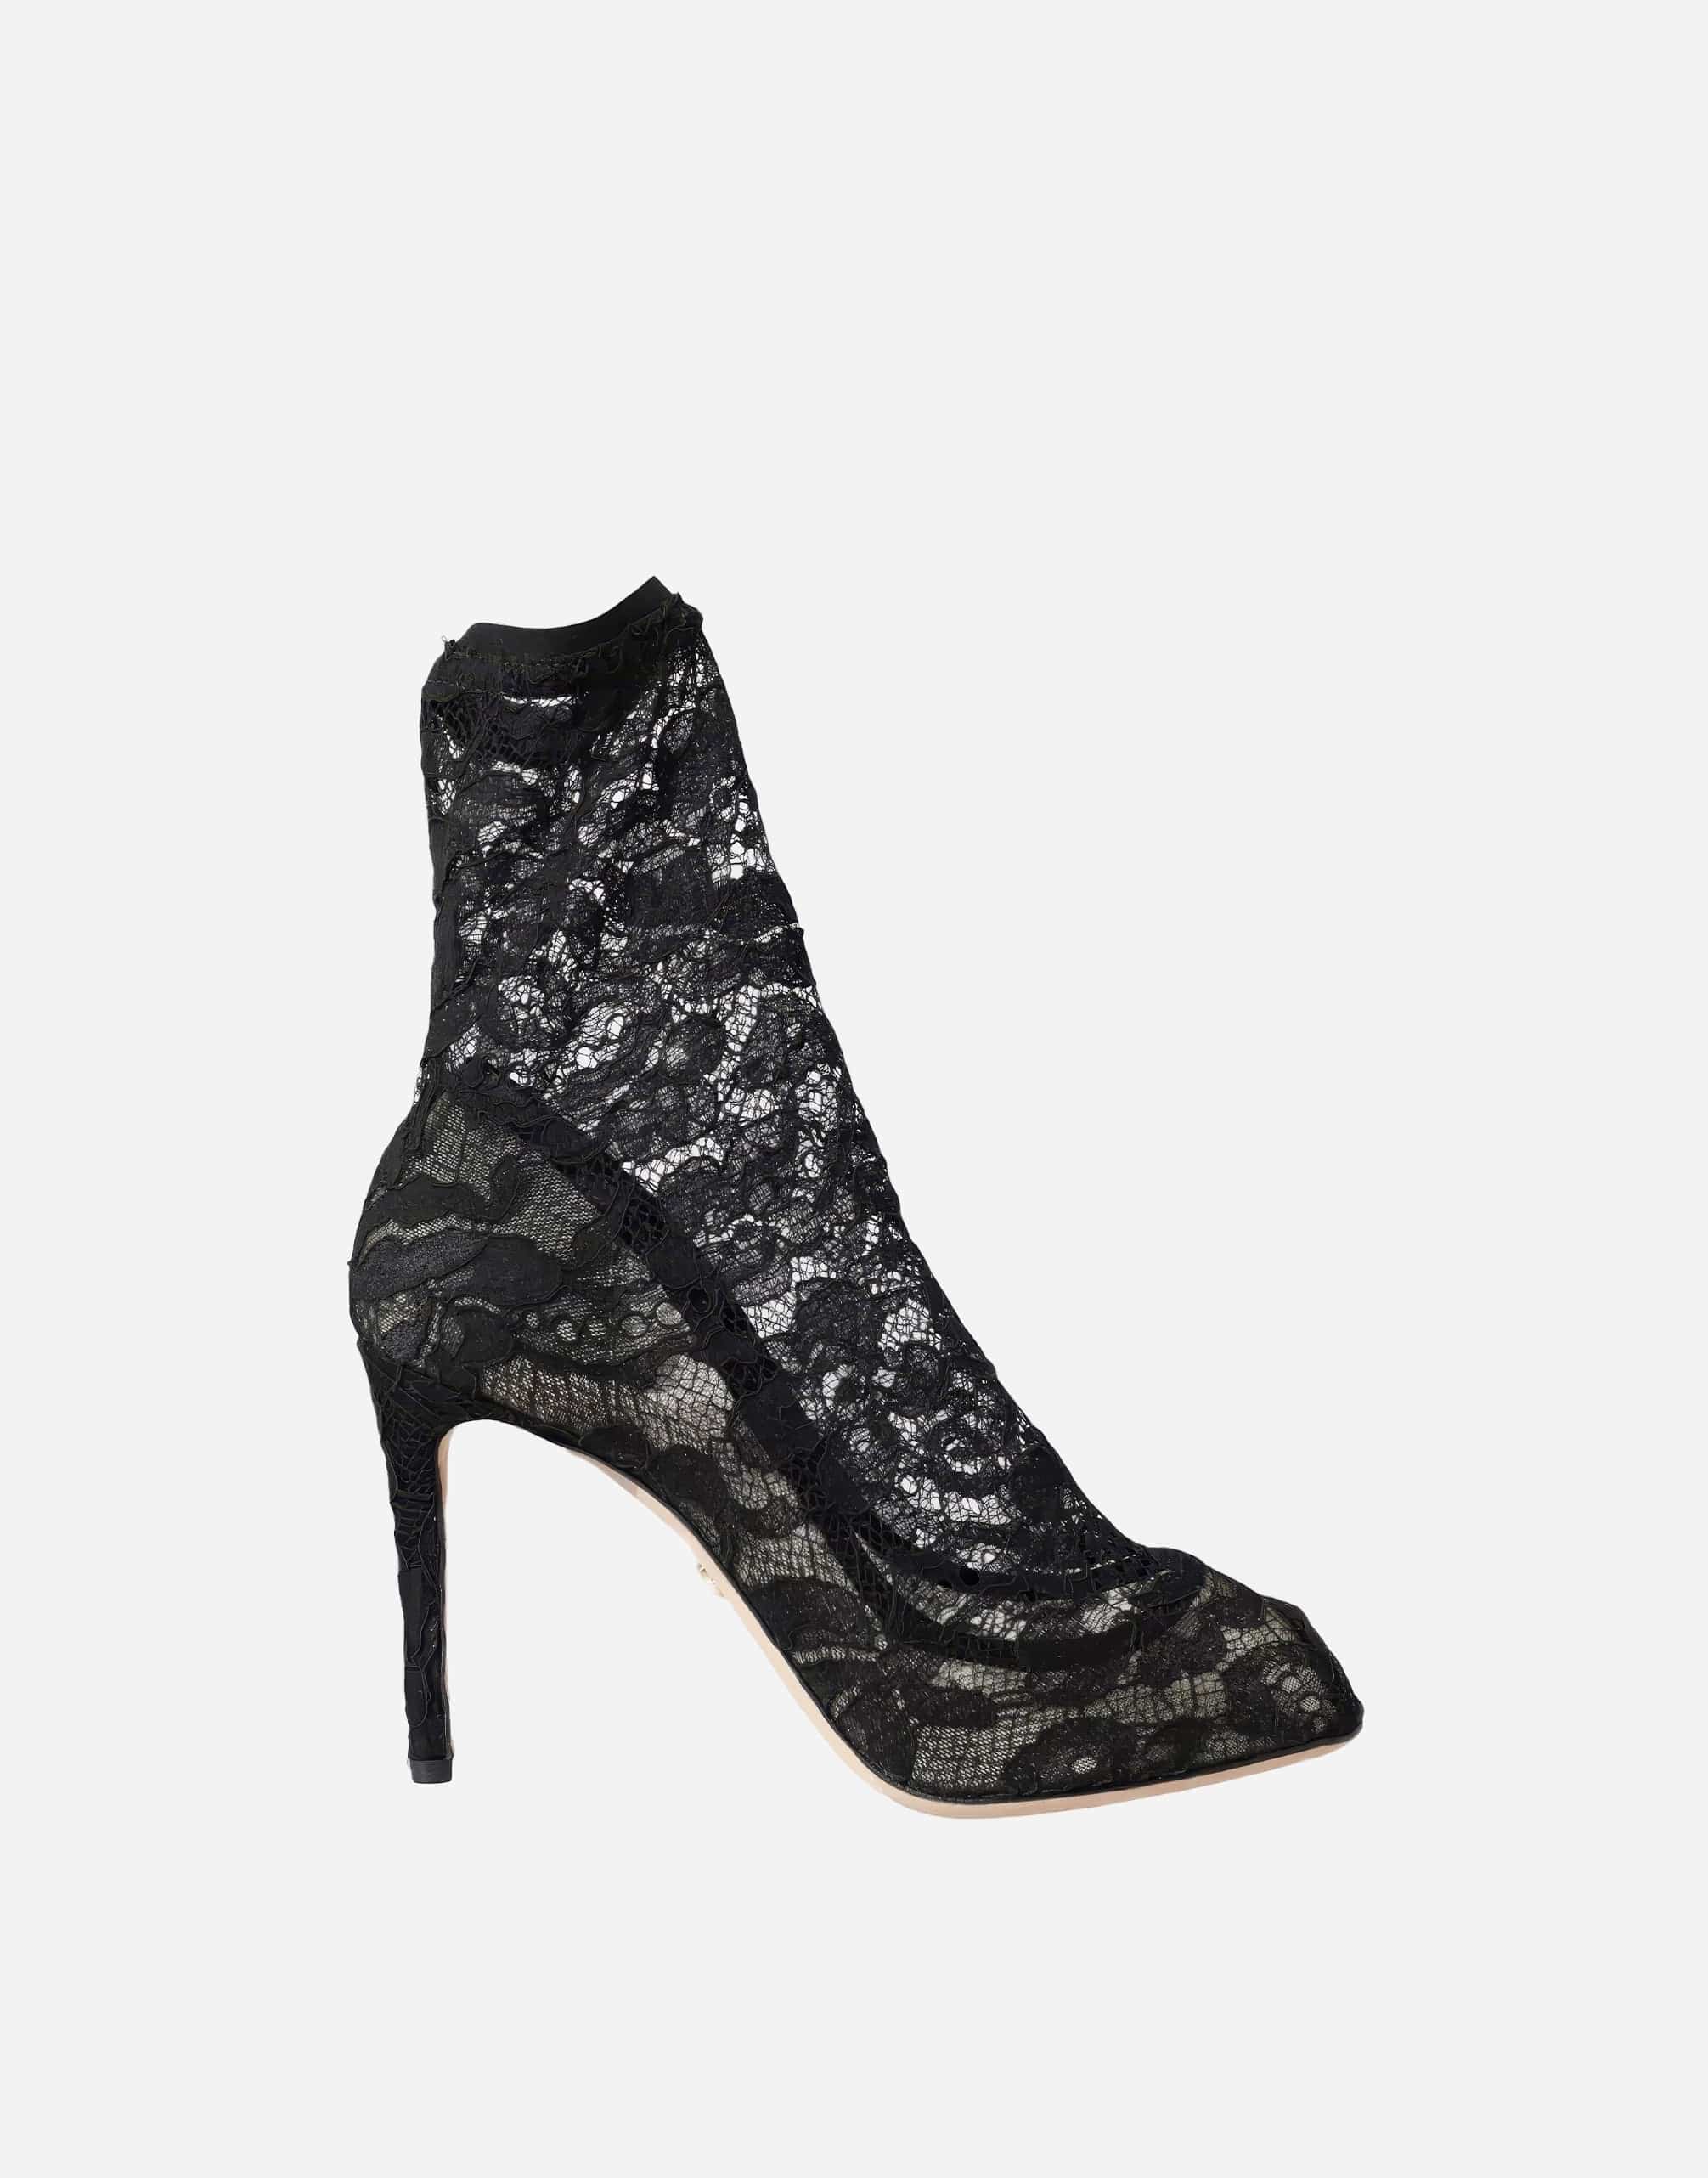 Dolce & Gabbana Bette Corded Tulle Boots